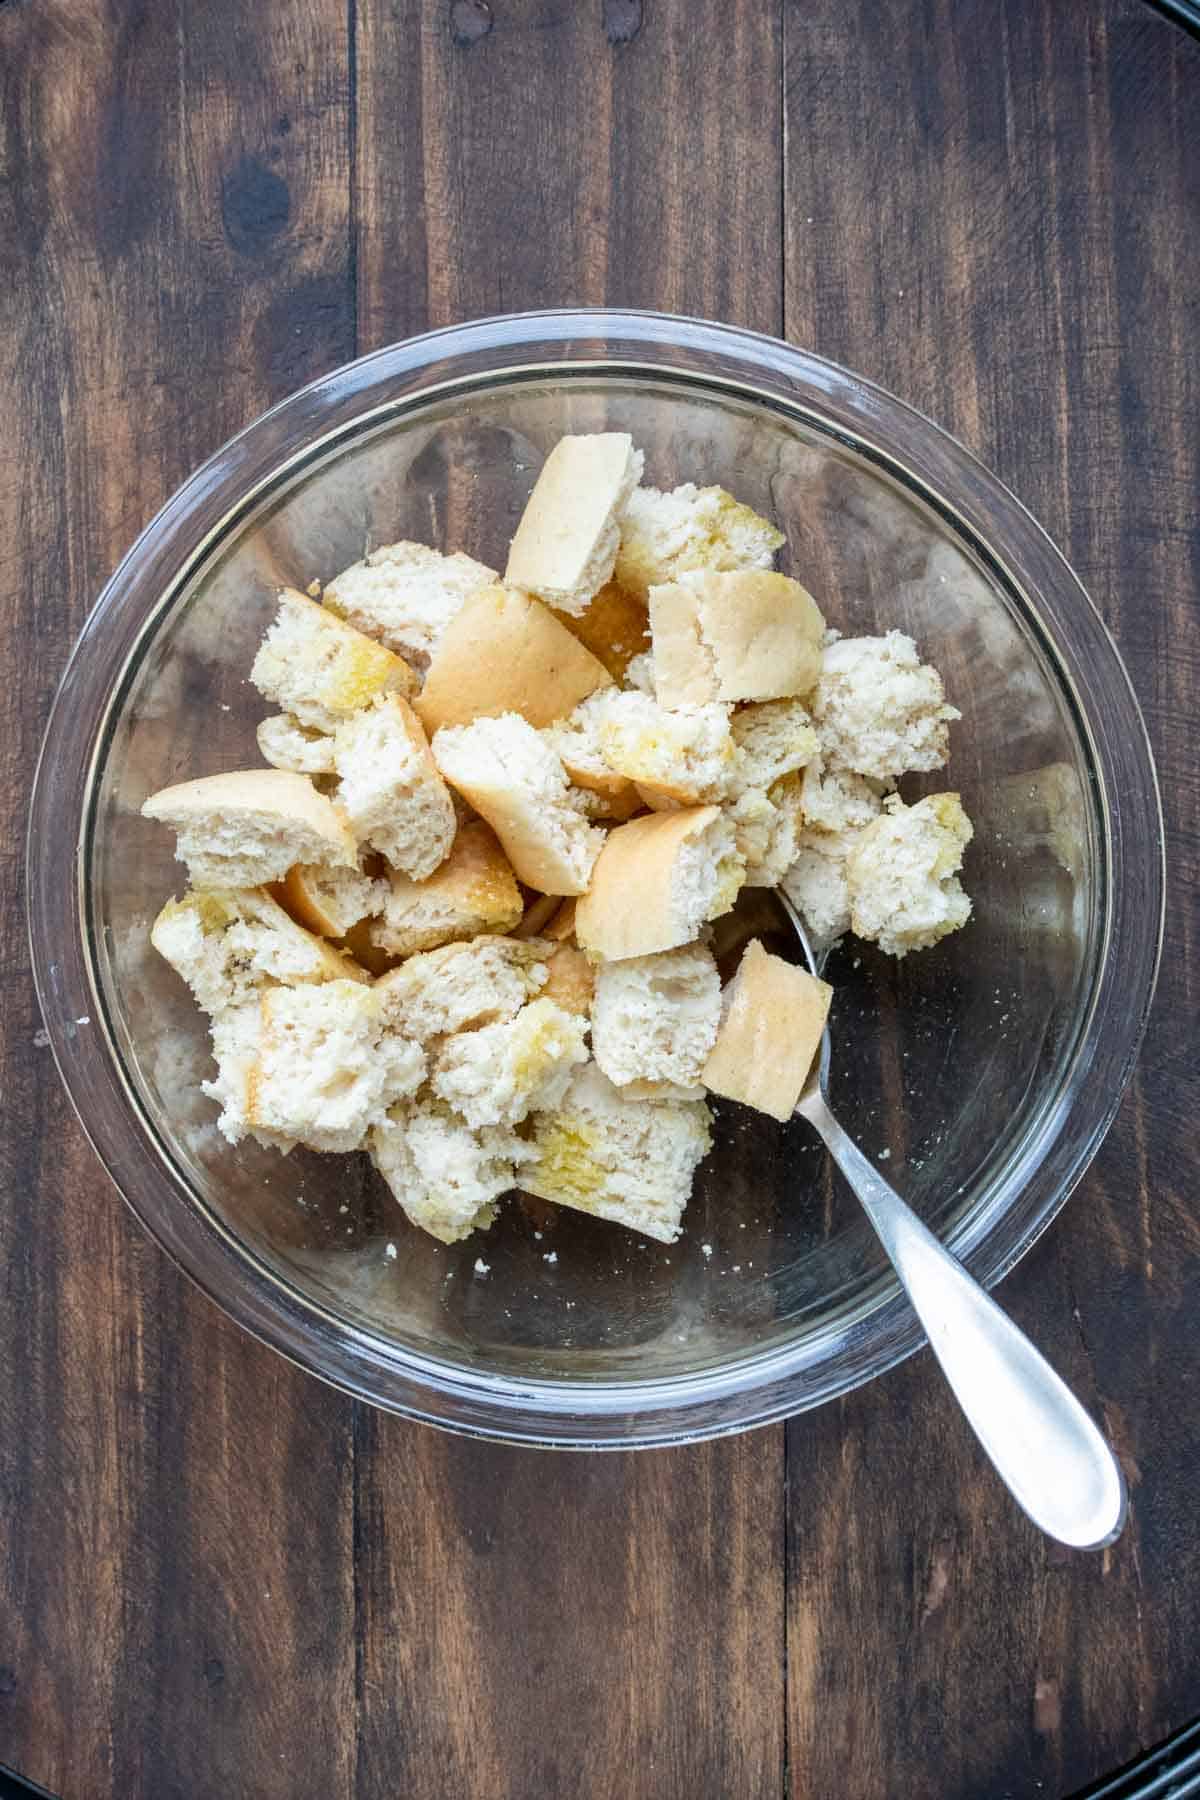 Cubes of bread in a glass bowl with a spoon